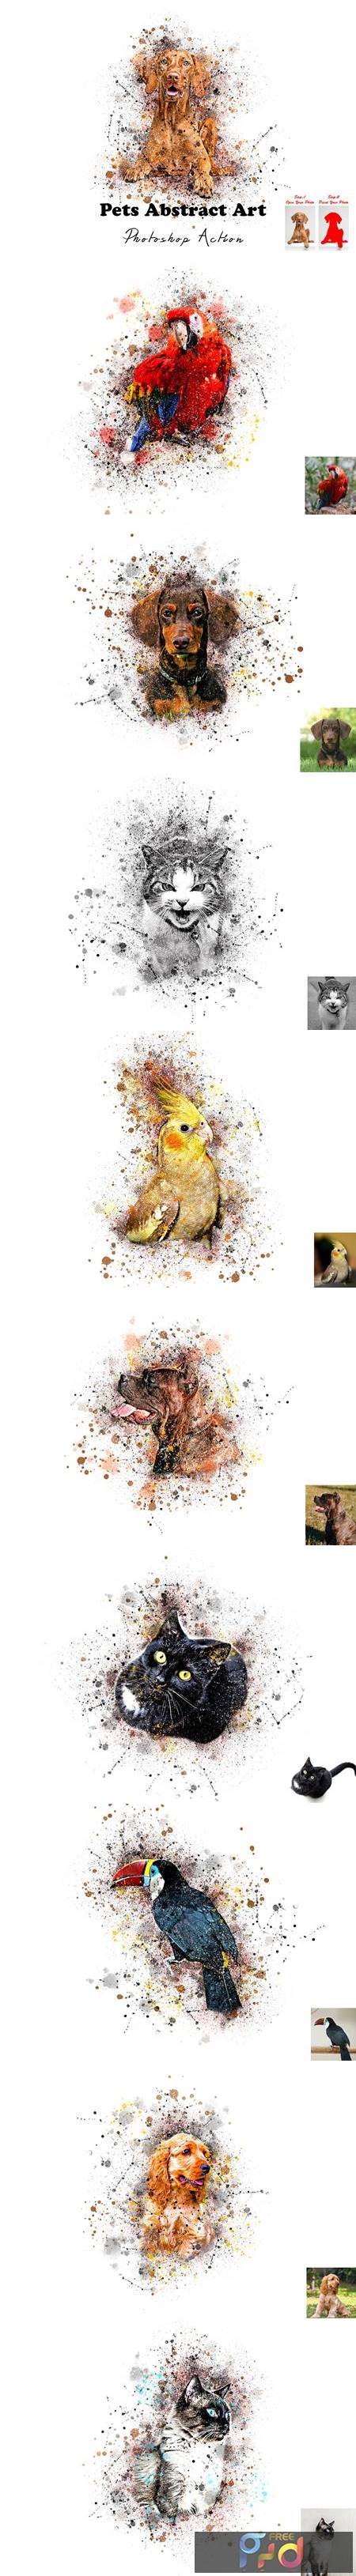 Pets Abstract Art Photoshop Action 7541562 1